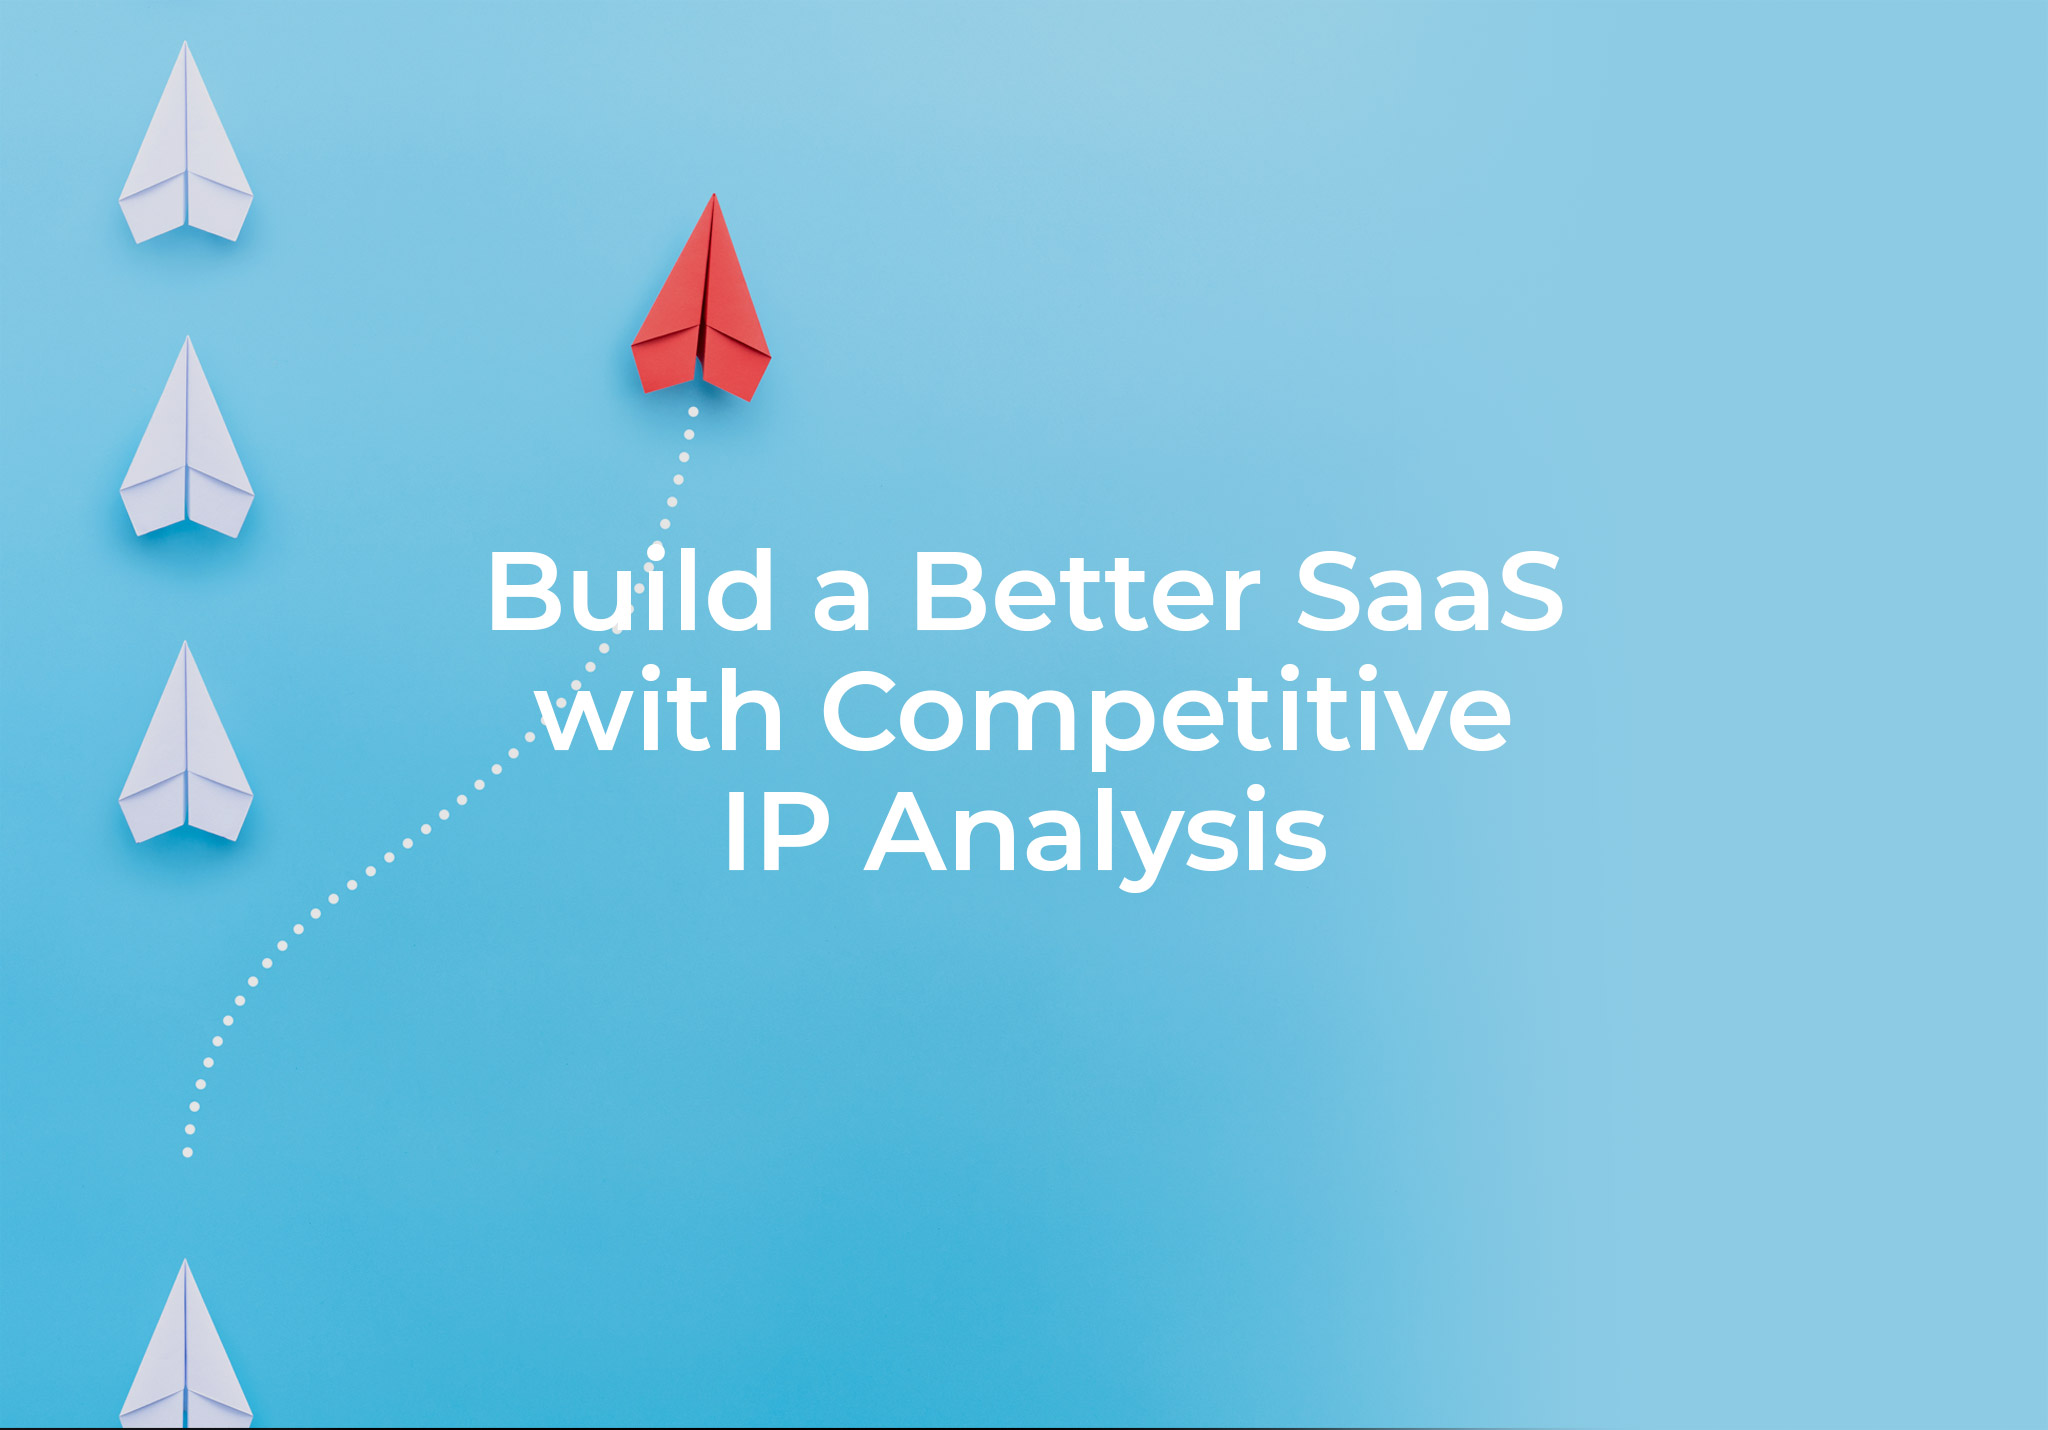 Build a Better SaaS with Competitive IP Analysis￼